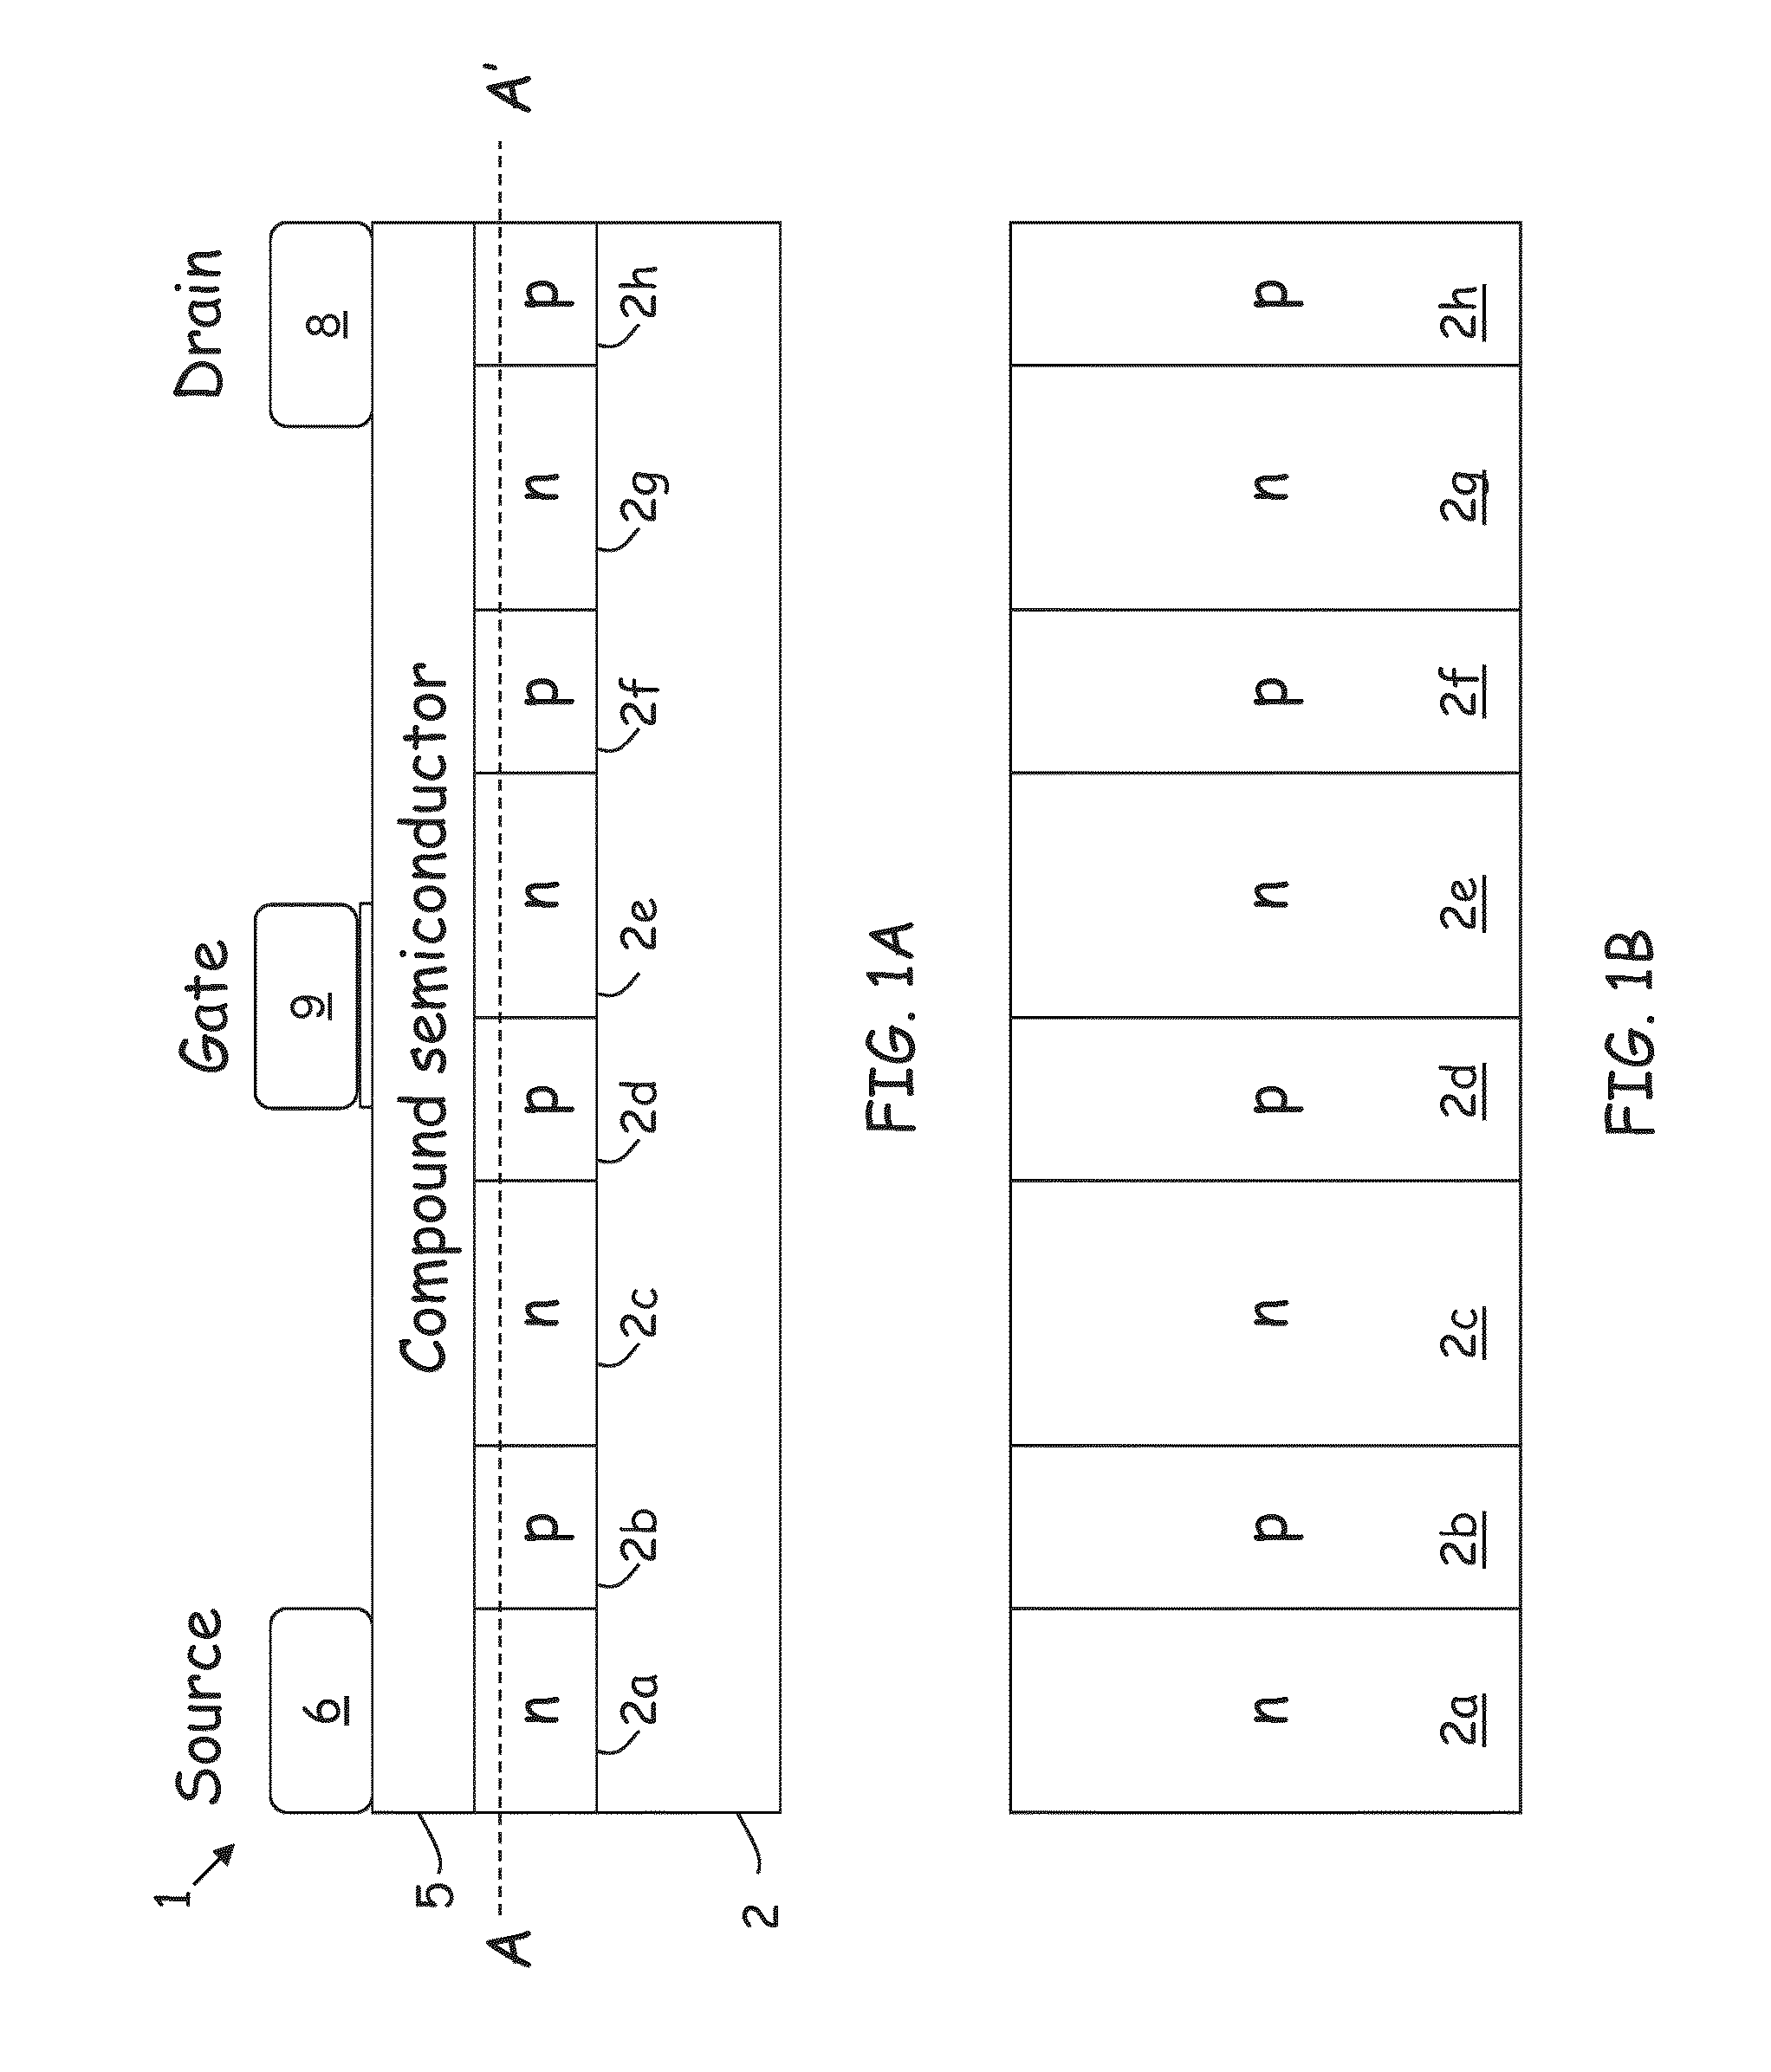 Reducing leakage current in semiconductor devices